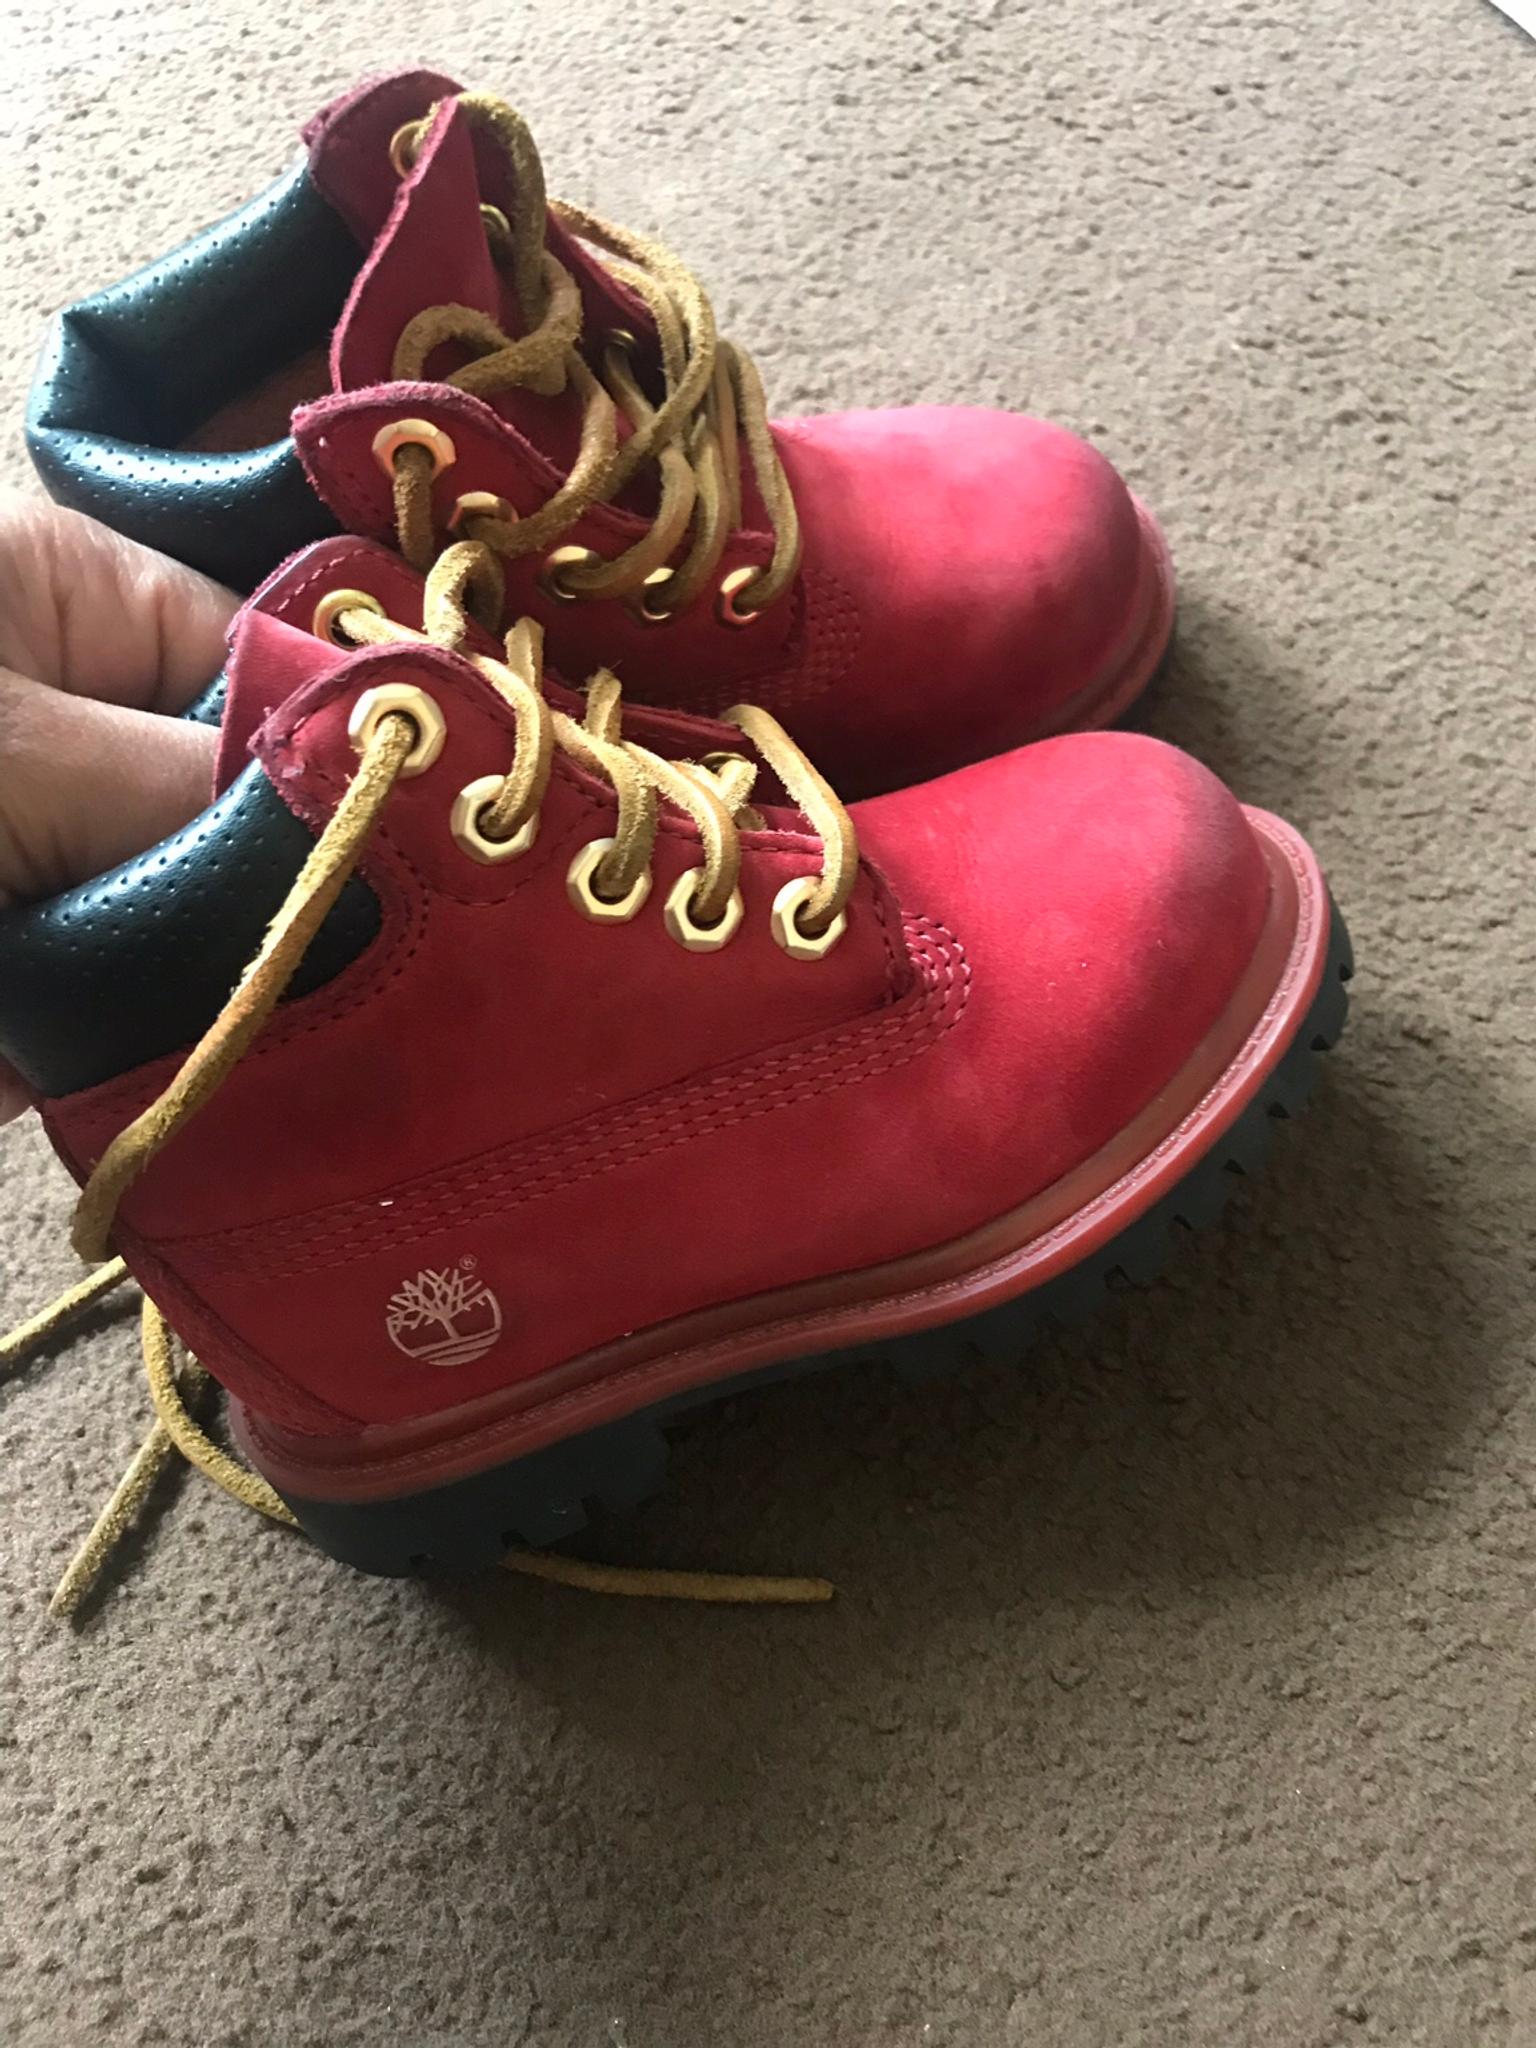 Size 6.5 red baby timberlands in E17 